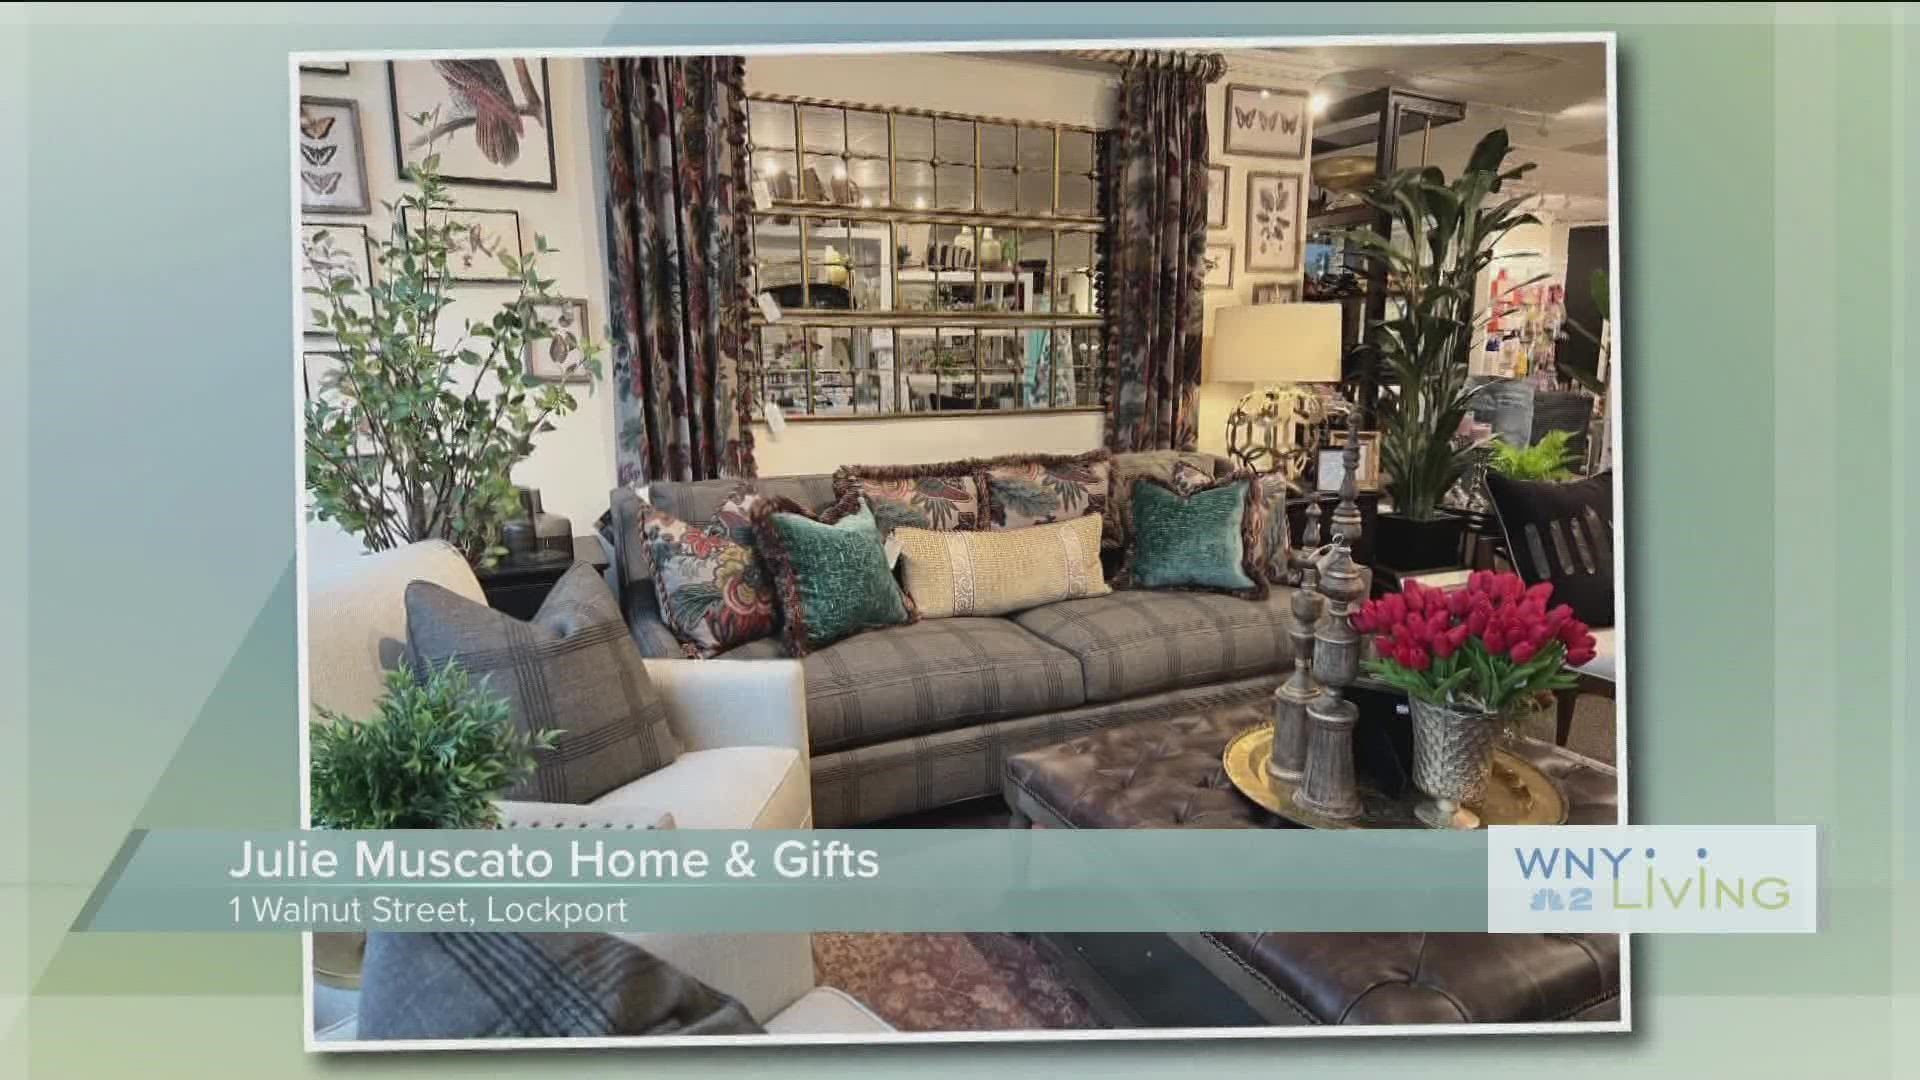 WNY Living - August 27 - Julie Muscato Home & Gifts (THIS VIDEO IS SPONSORED BY JULIE MUSCATO HOME & GIFTS)